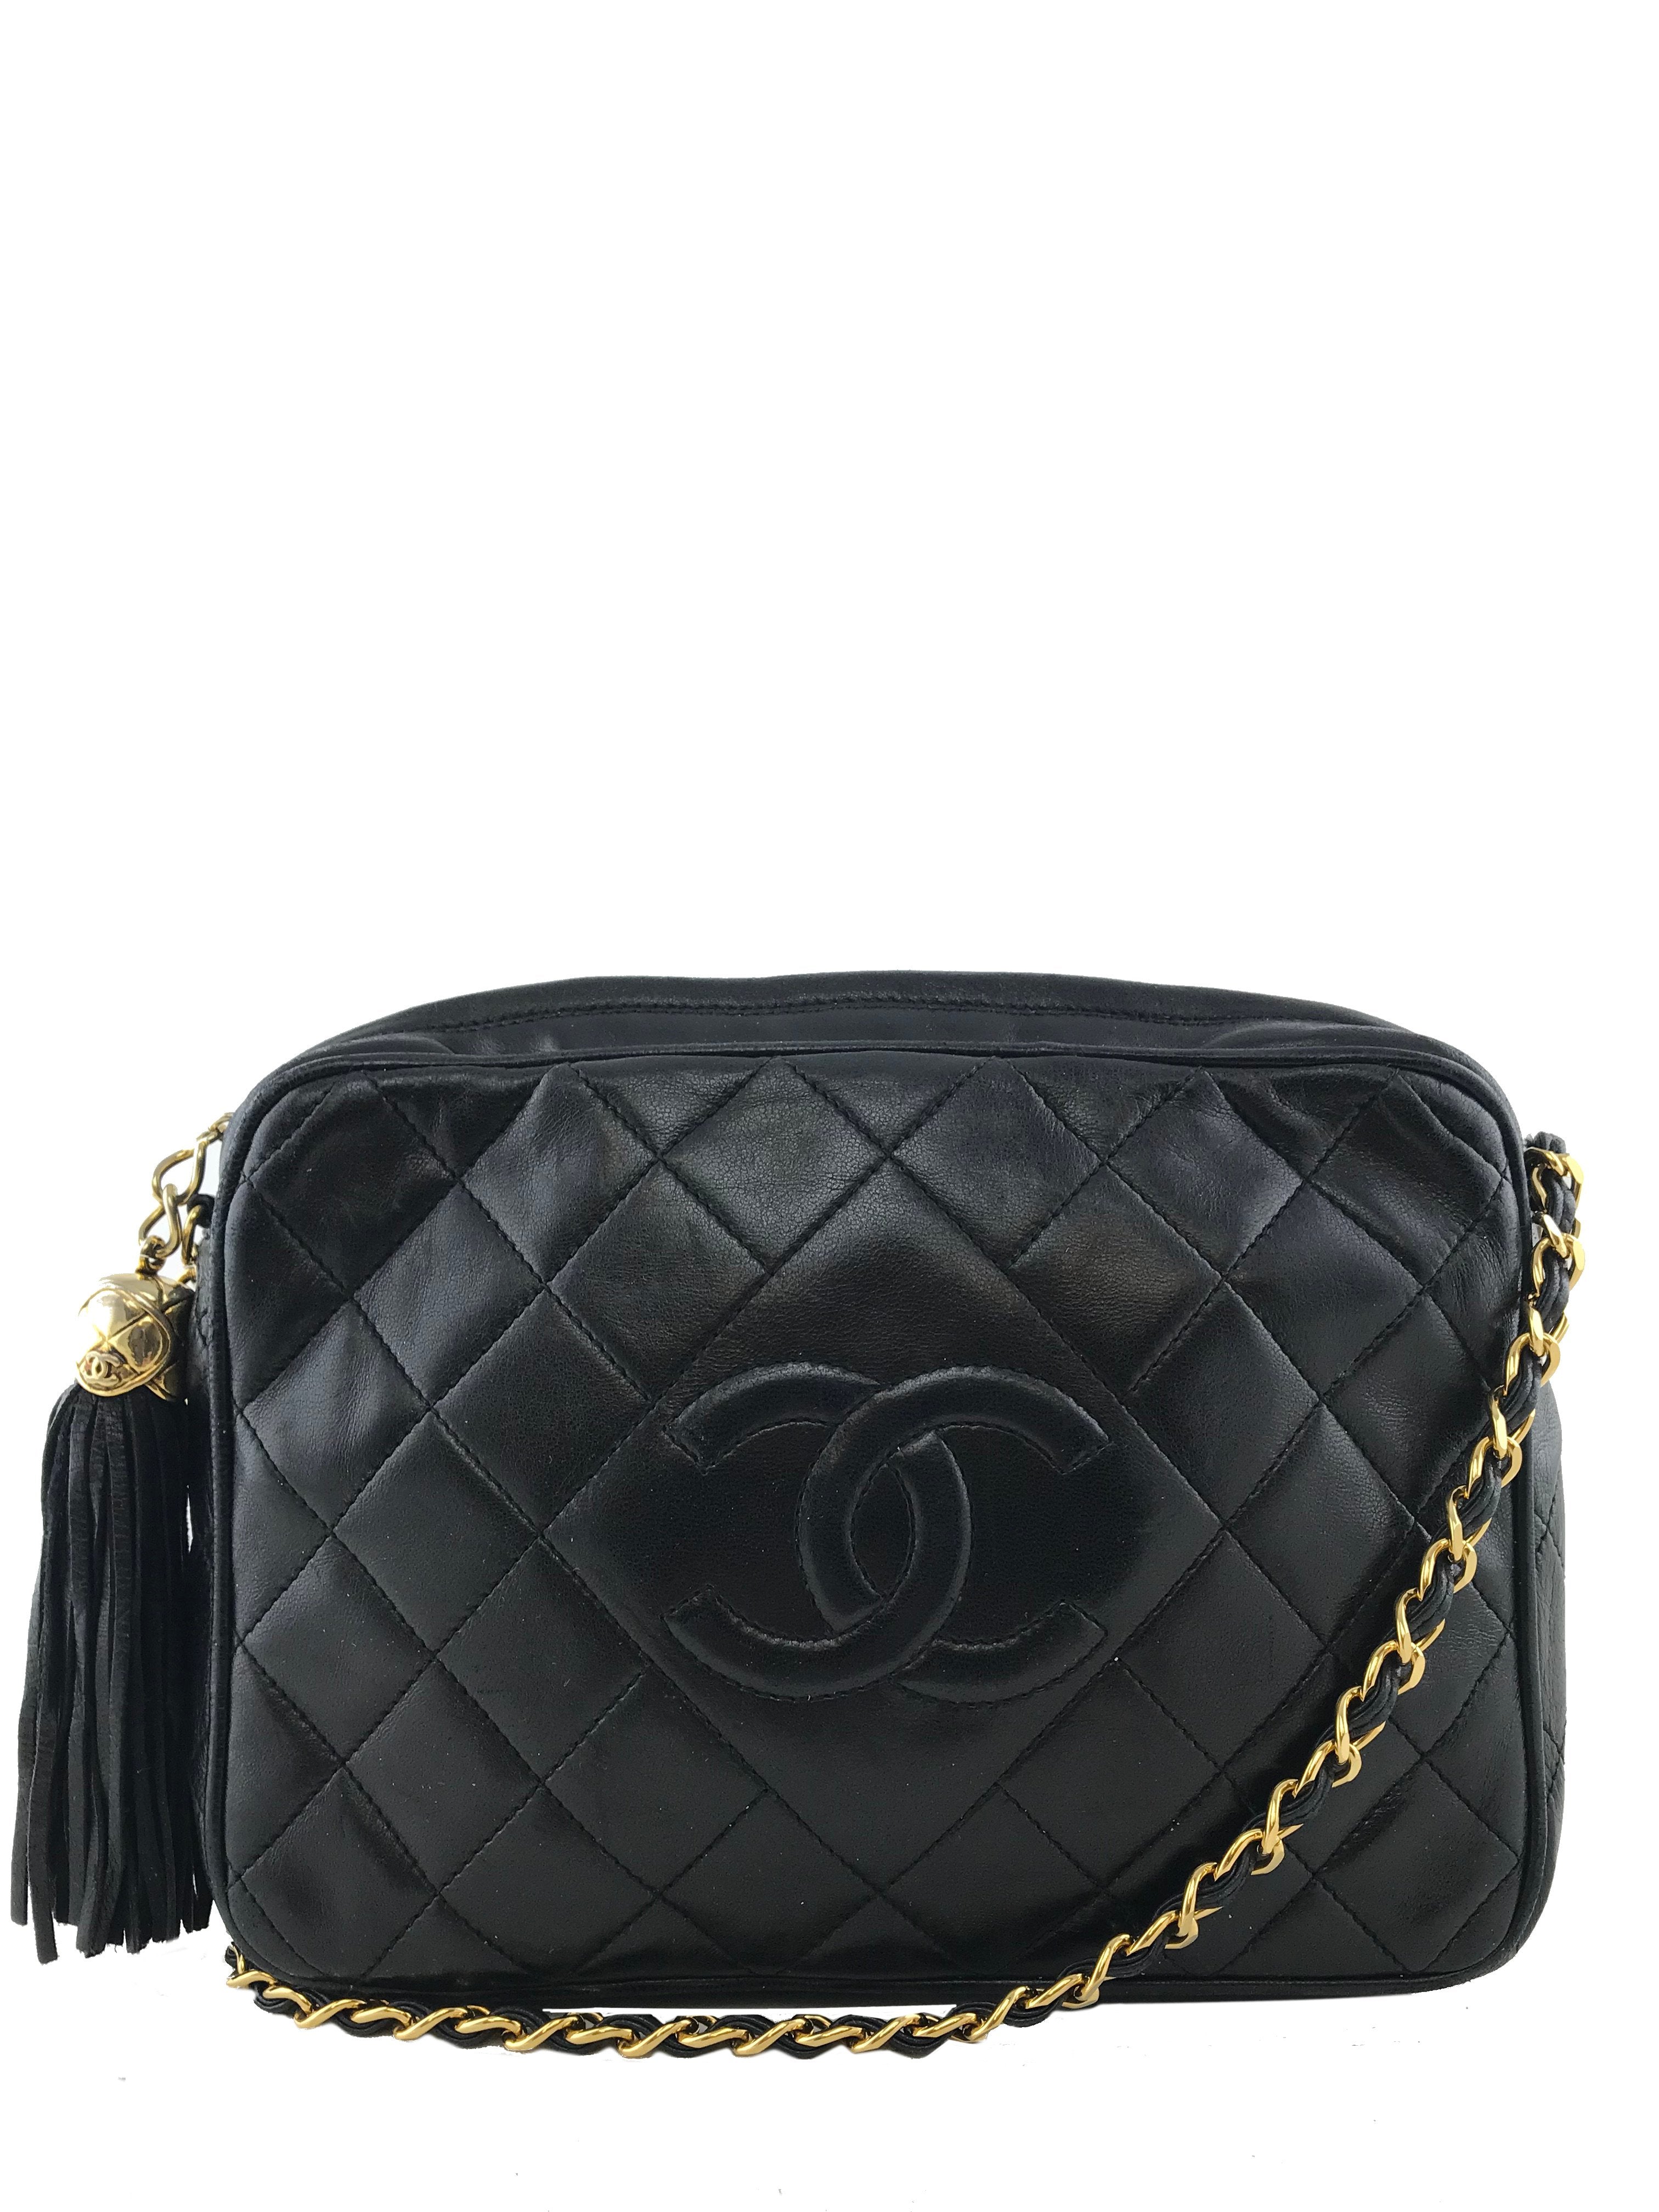 Chanel Quilted Lambskin Tassel Camera Case Bag